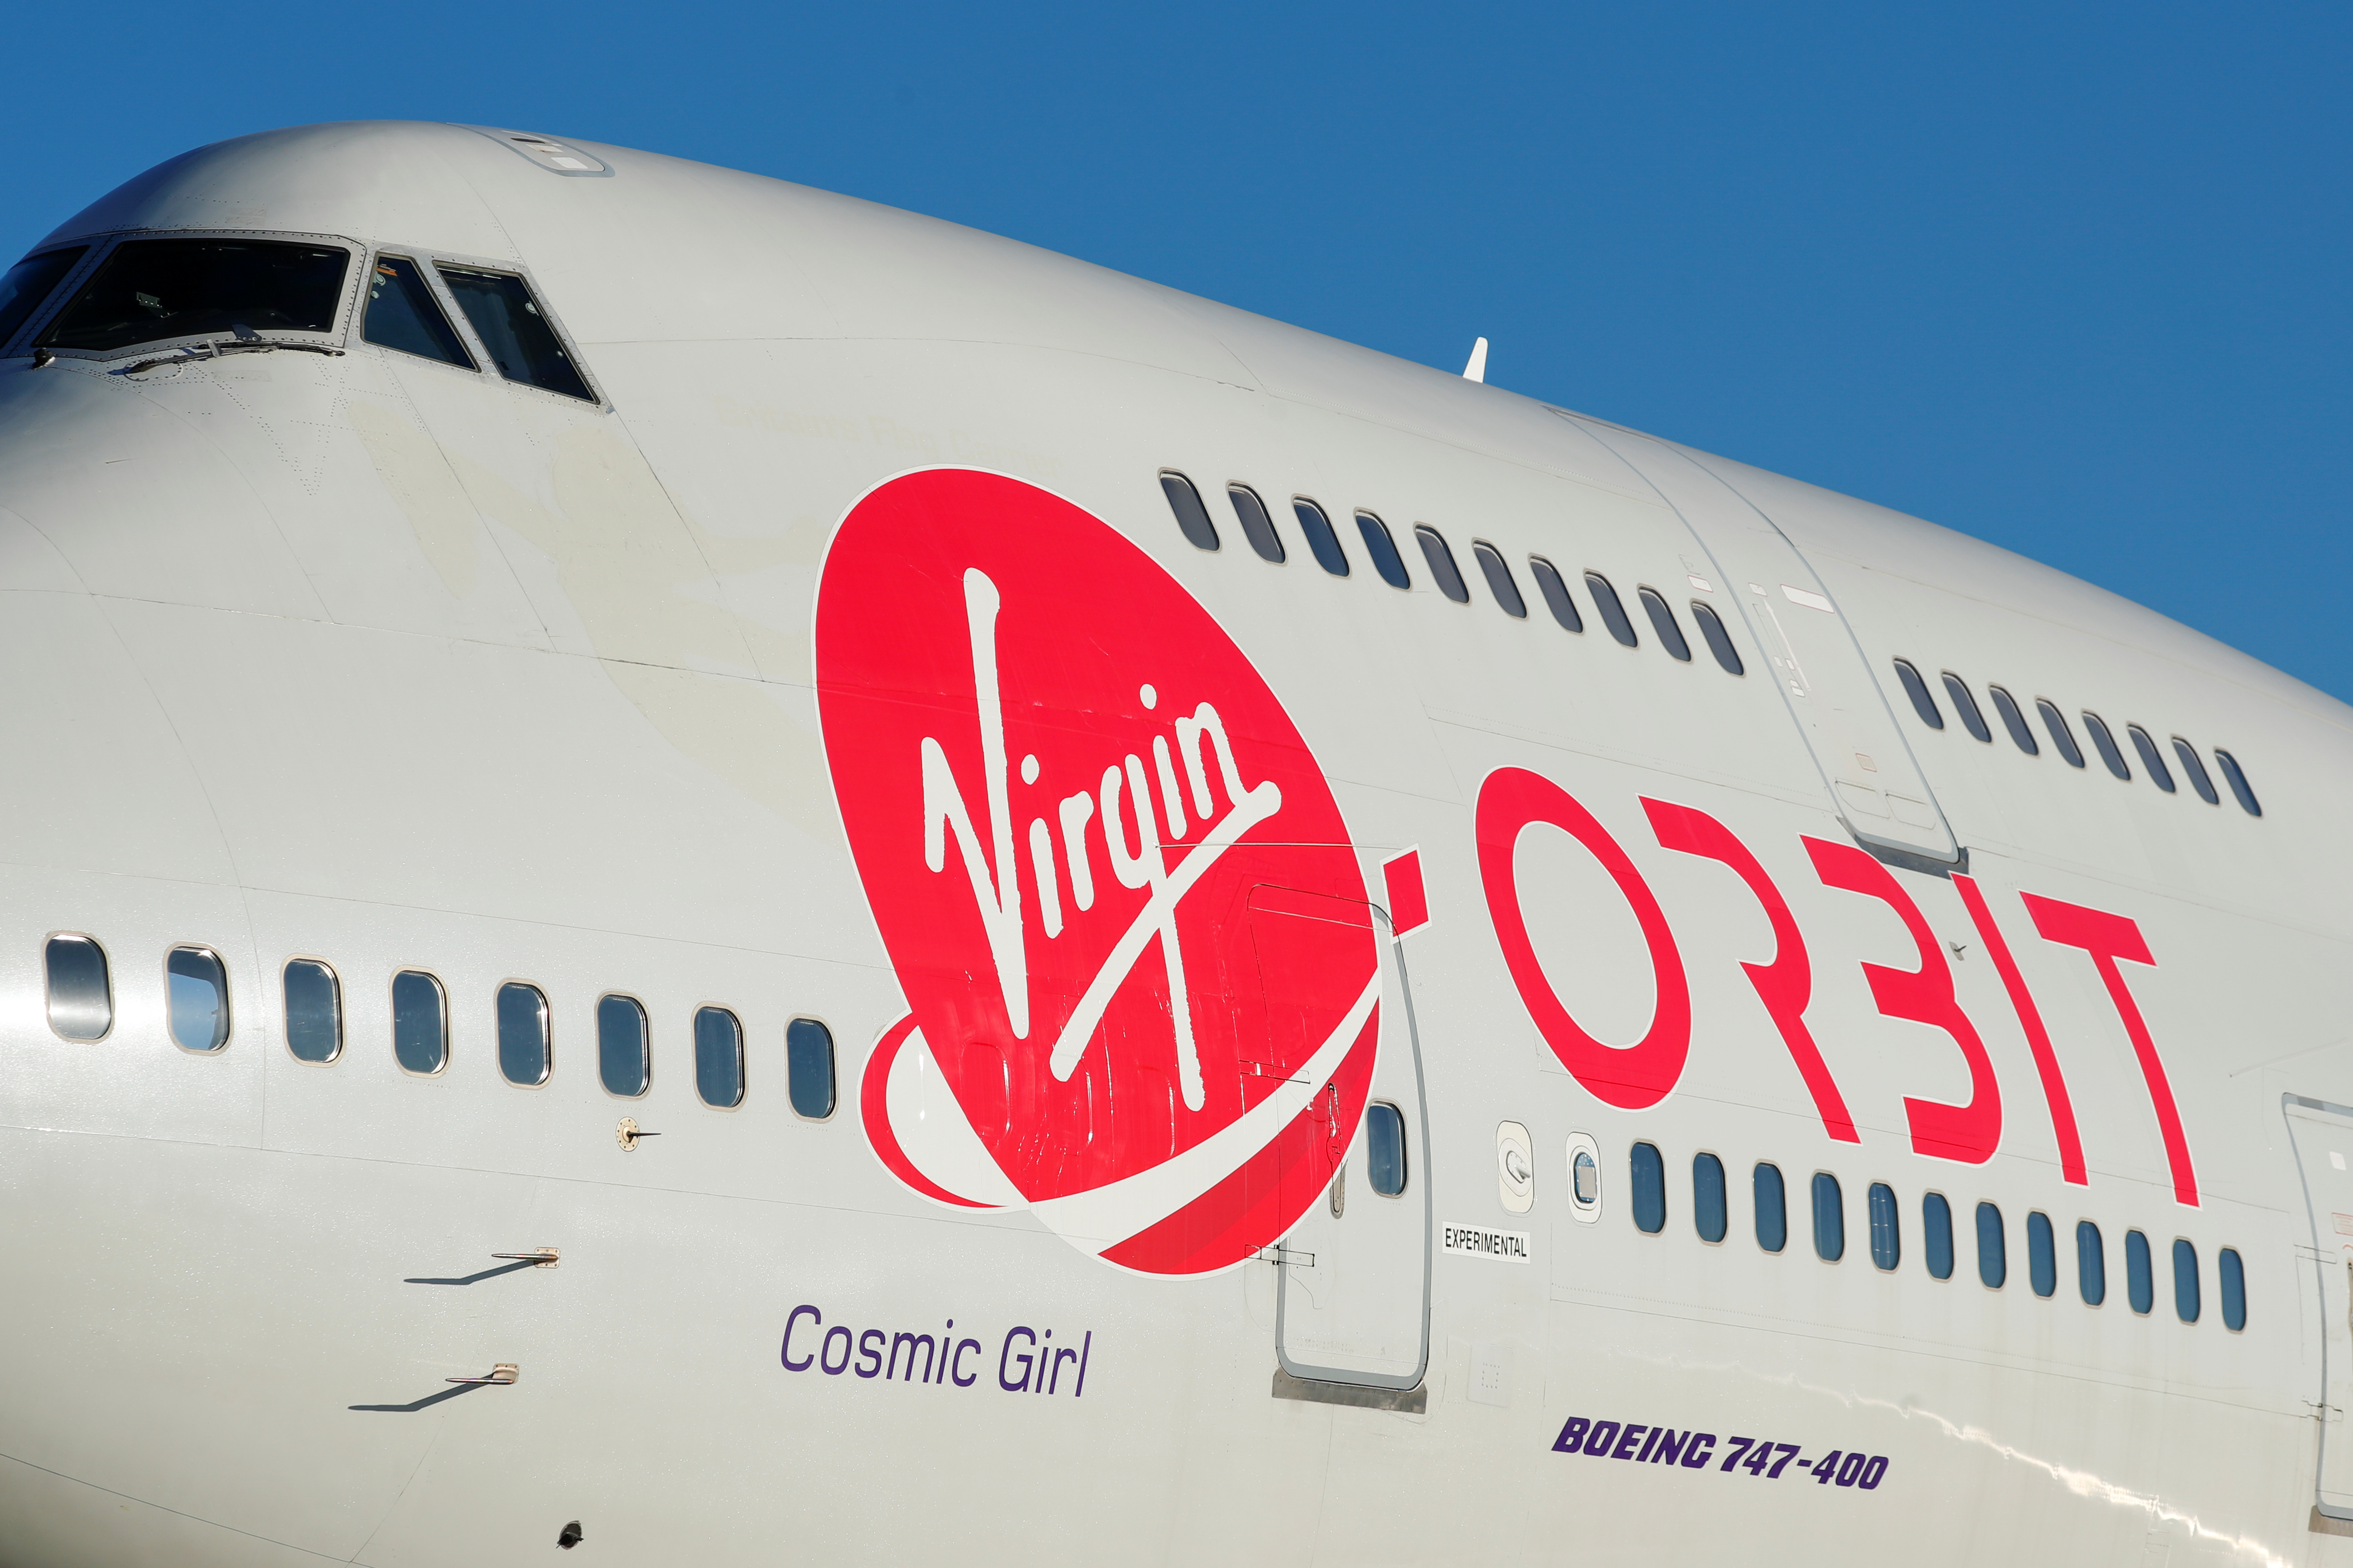 Richard Branson's Virgin Orbit,  prior to its takeoff on a key drop test of its high-altitude launch system for satellites from Mojave, California